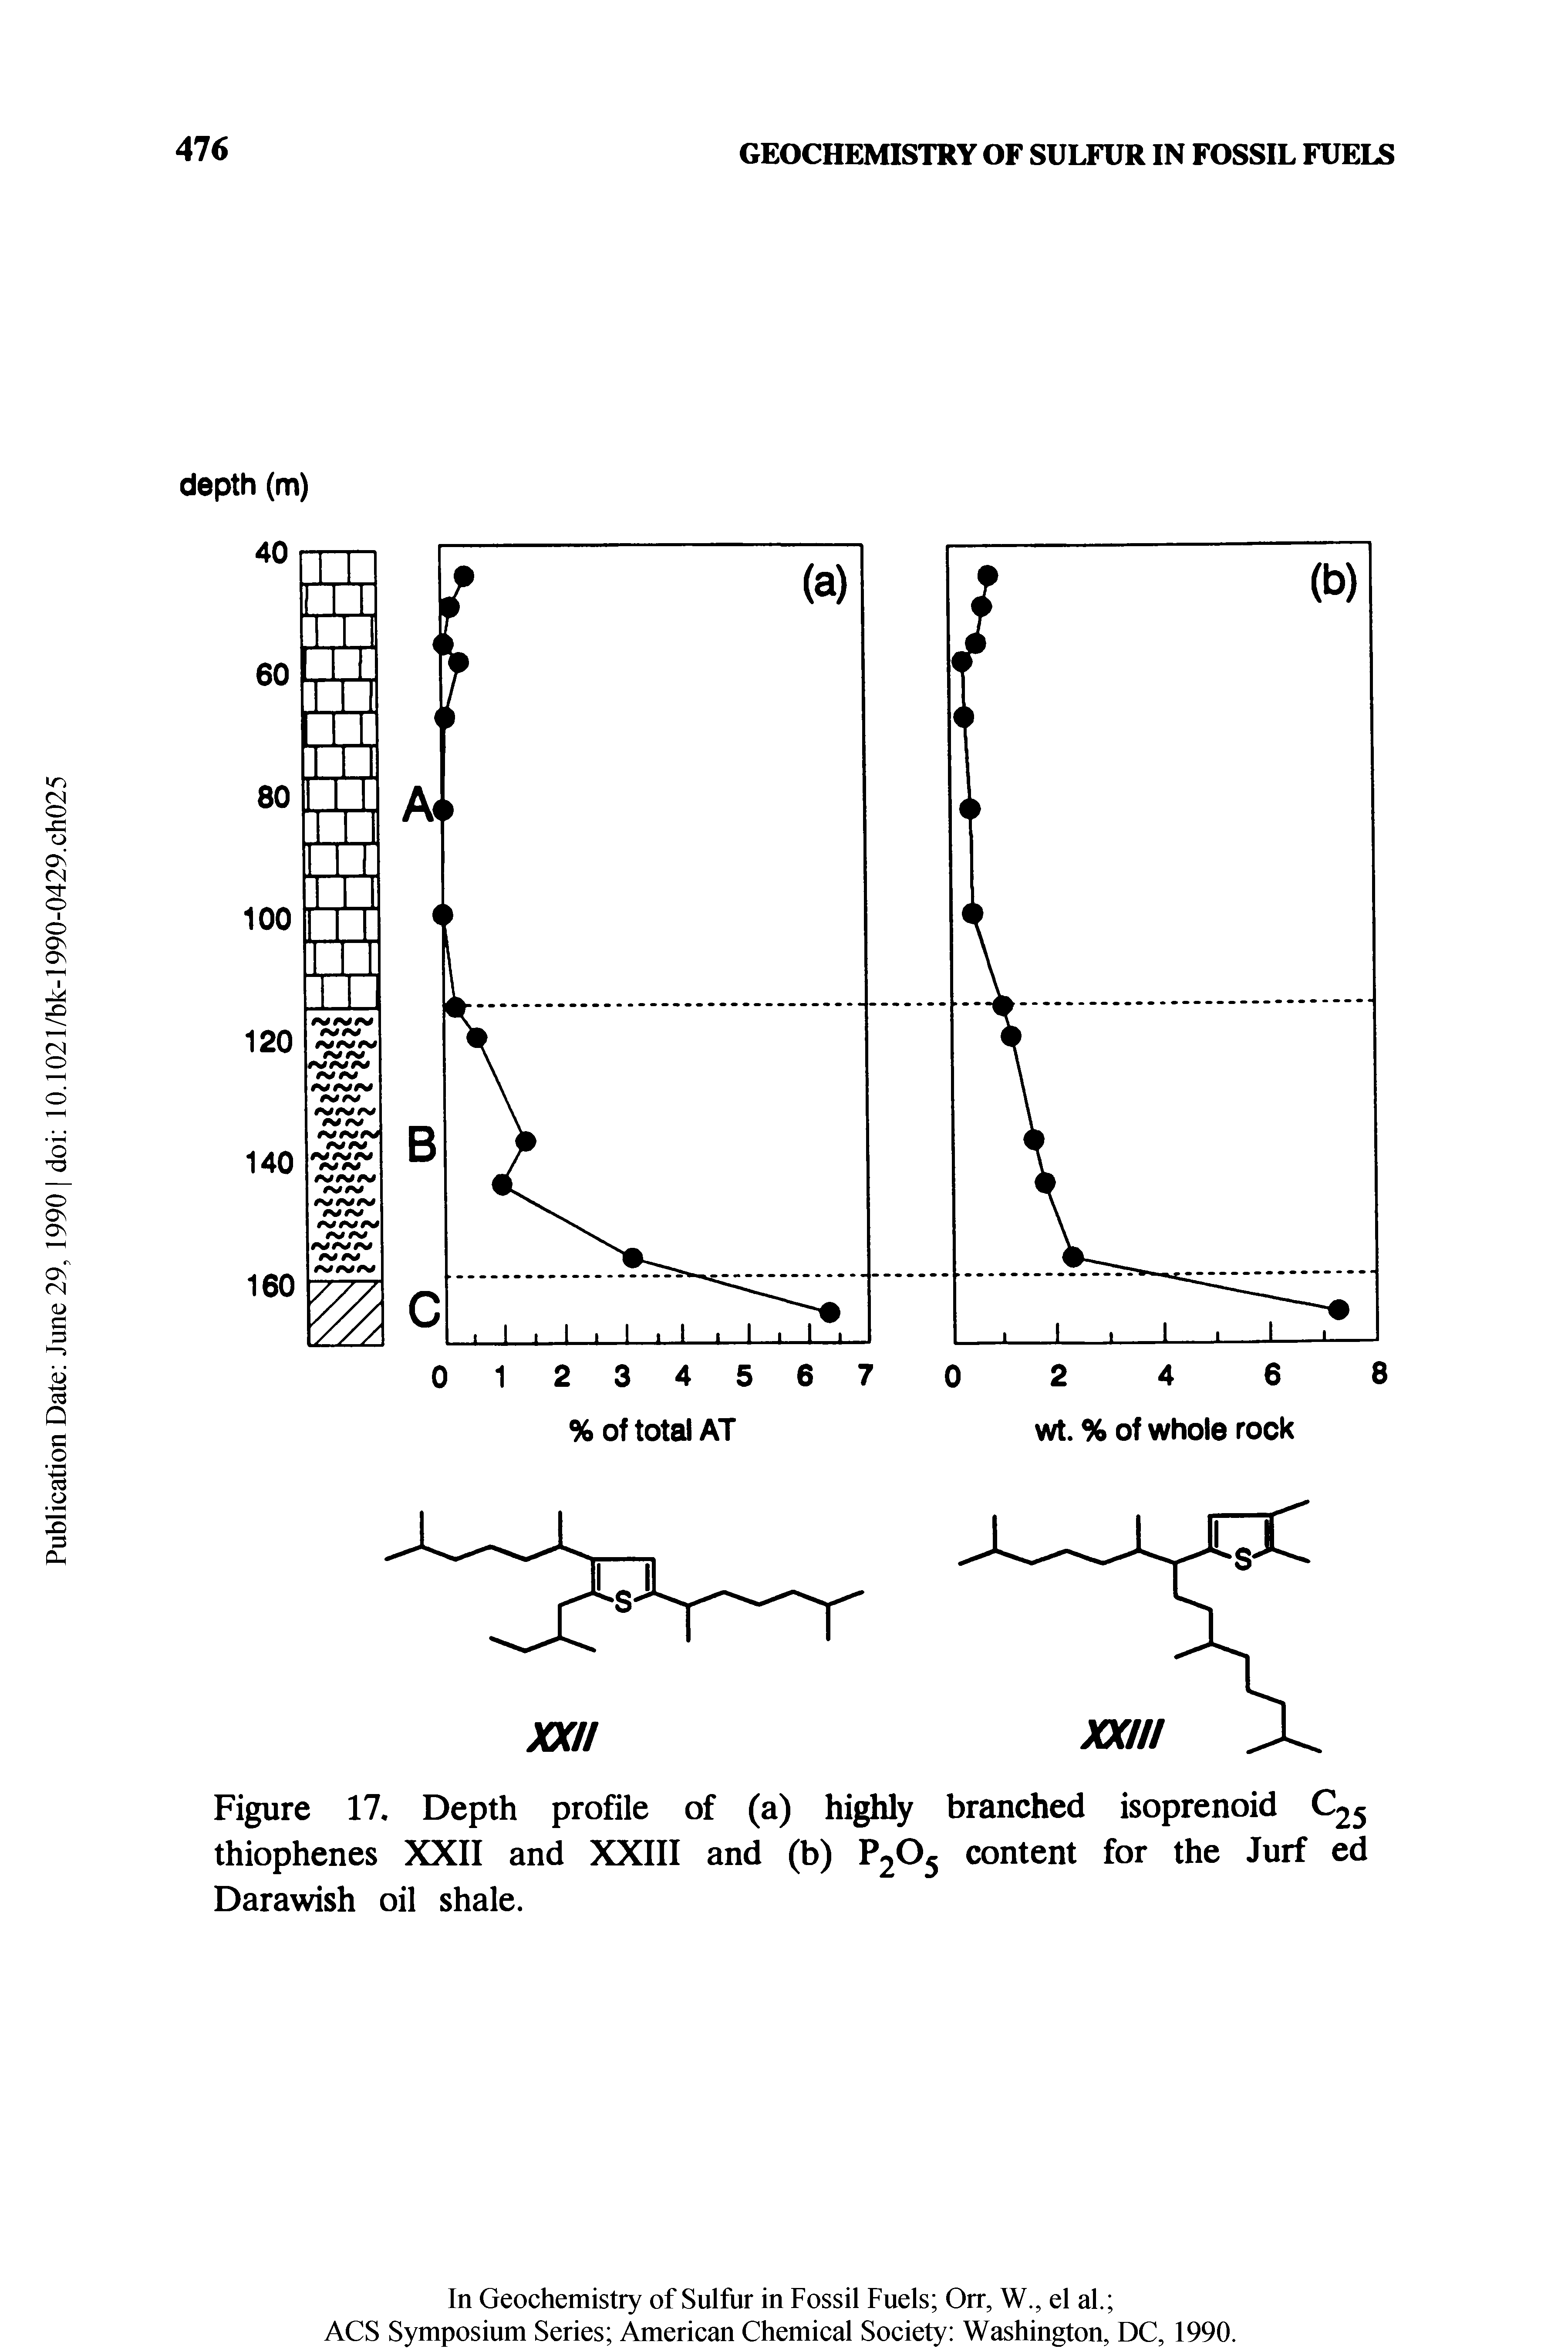 Figure 17. Depth profile of (a) highly branched isoprenoid C25 thiophenes XXII and XXIII and (b) P2C>5 content for the Jurf ed Darawish oil shale.